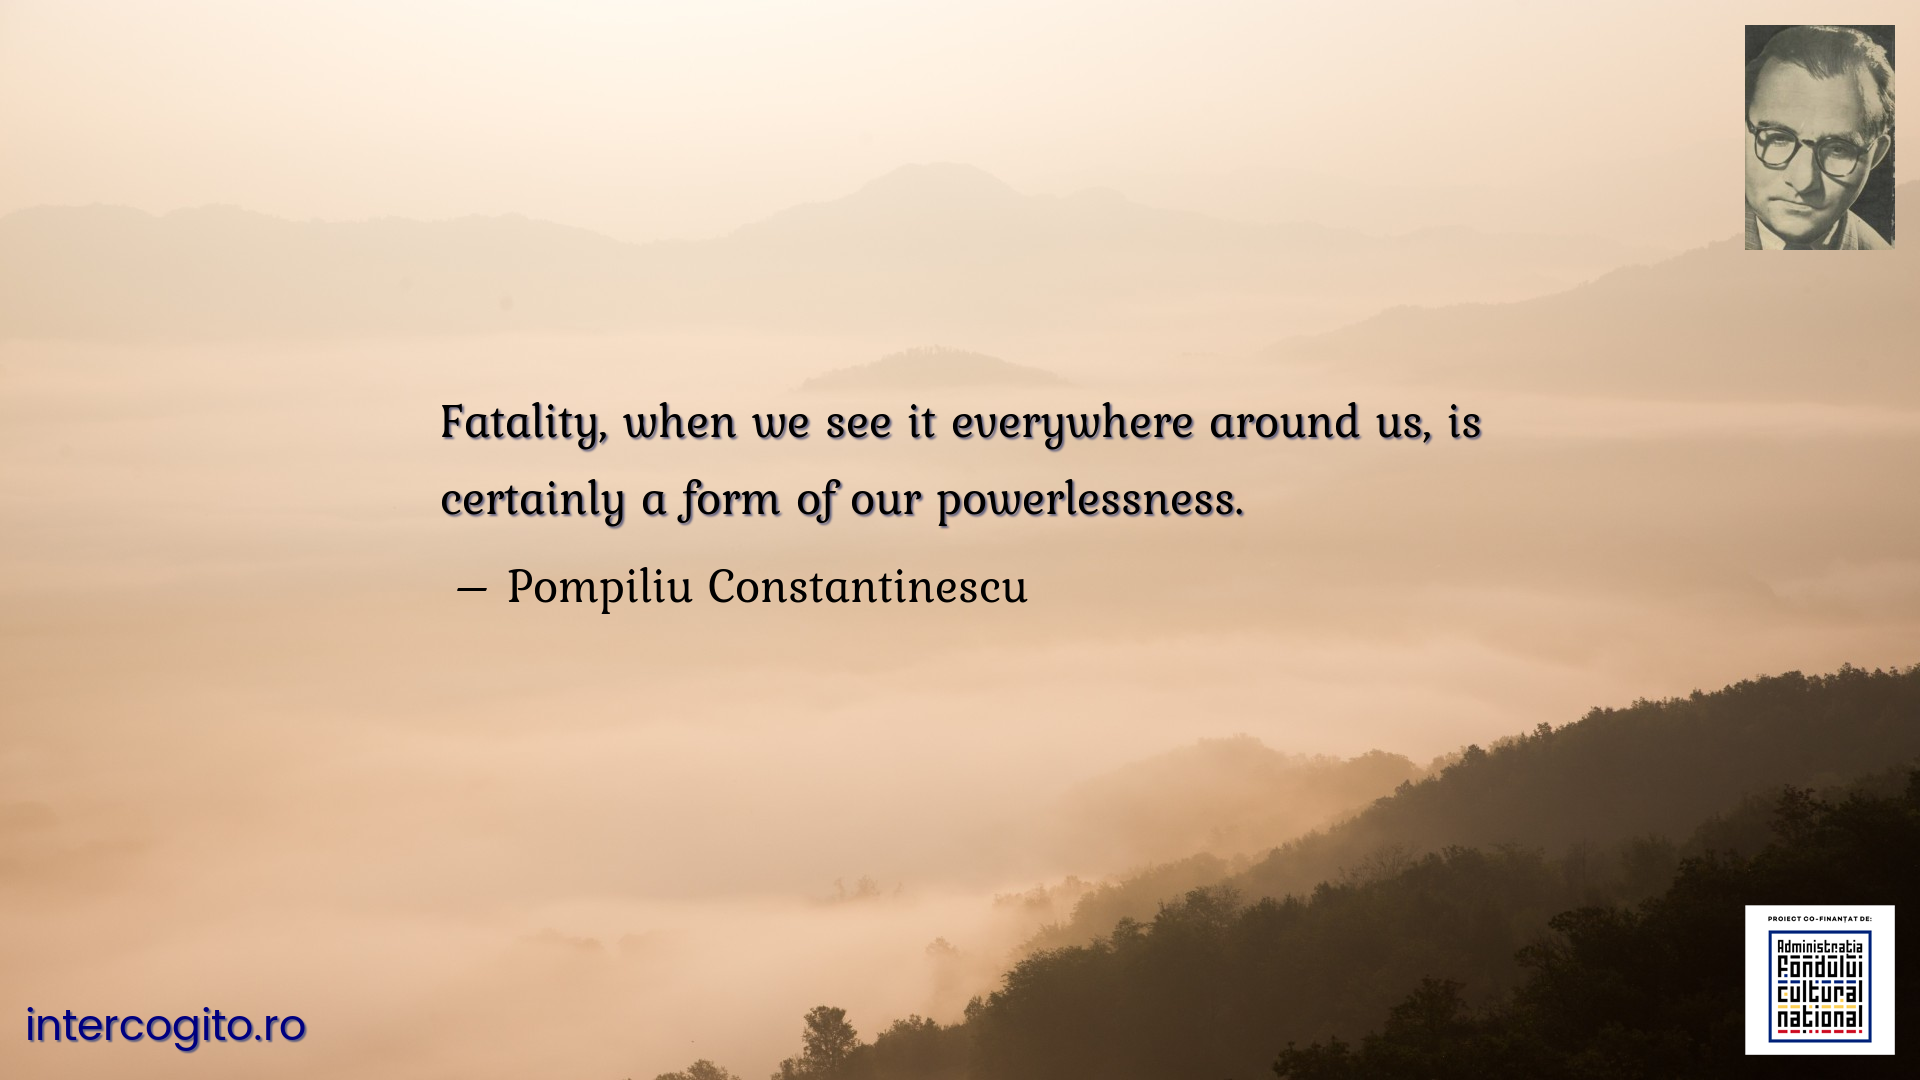 Fatality, when we see it everywhere around us, is certainly a form of our powerlessness.